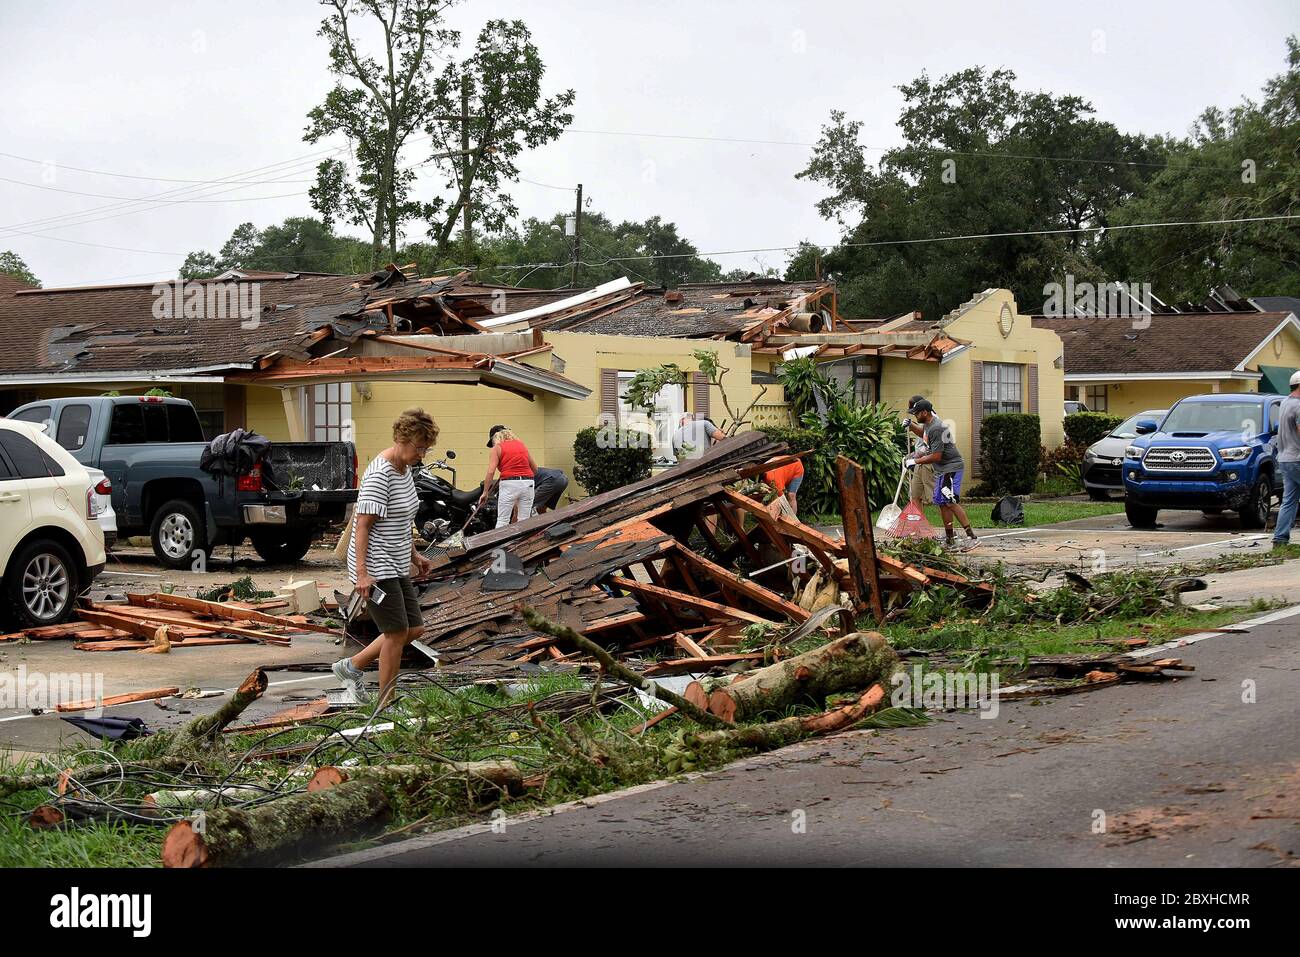 Orlando, United States. 07th June, 2020. June 7, 2020 - Orlando, Florida, United States - People clean up debris from damaged apartments after a tornado spawned by Tropical Storm Cristobal passed through Orlando, Florida on June 6, 2020. Credit: Paul Hennessy/Alamy Live News Stock Photo